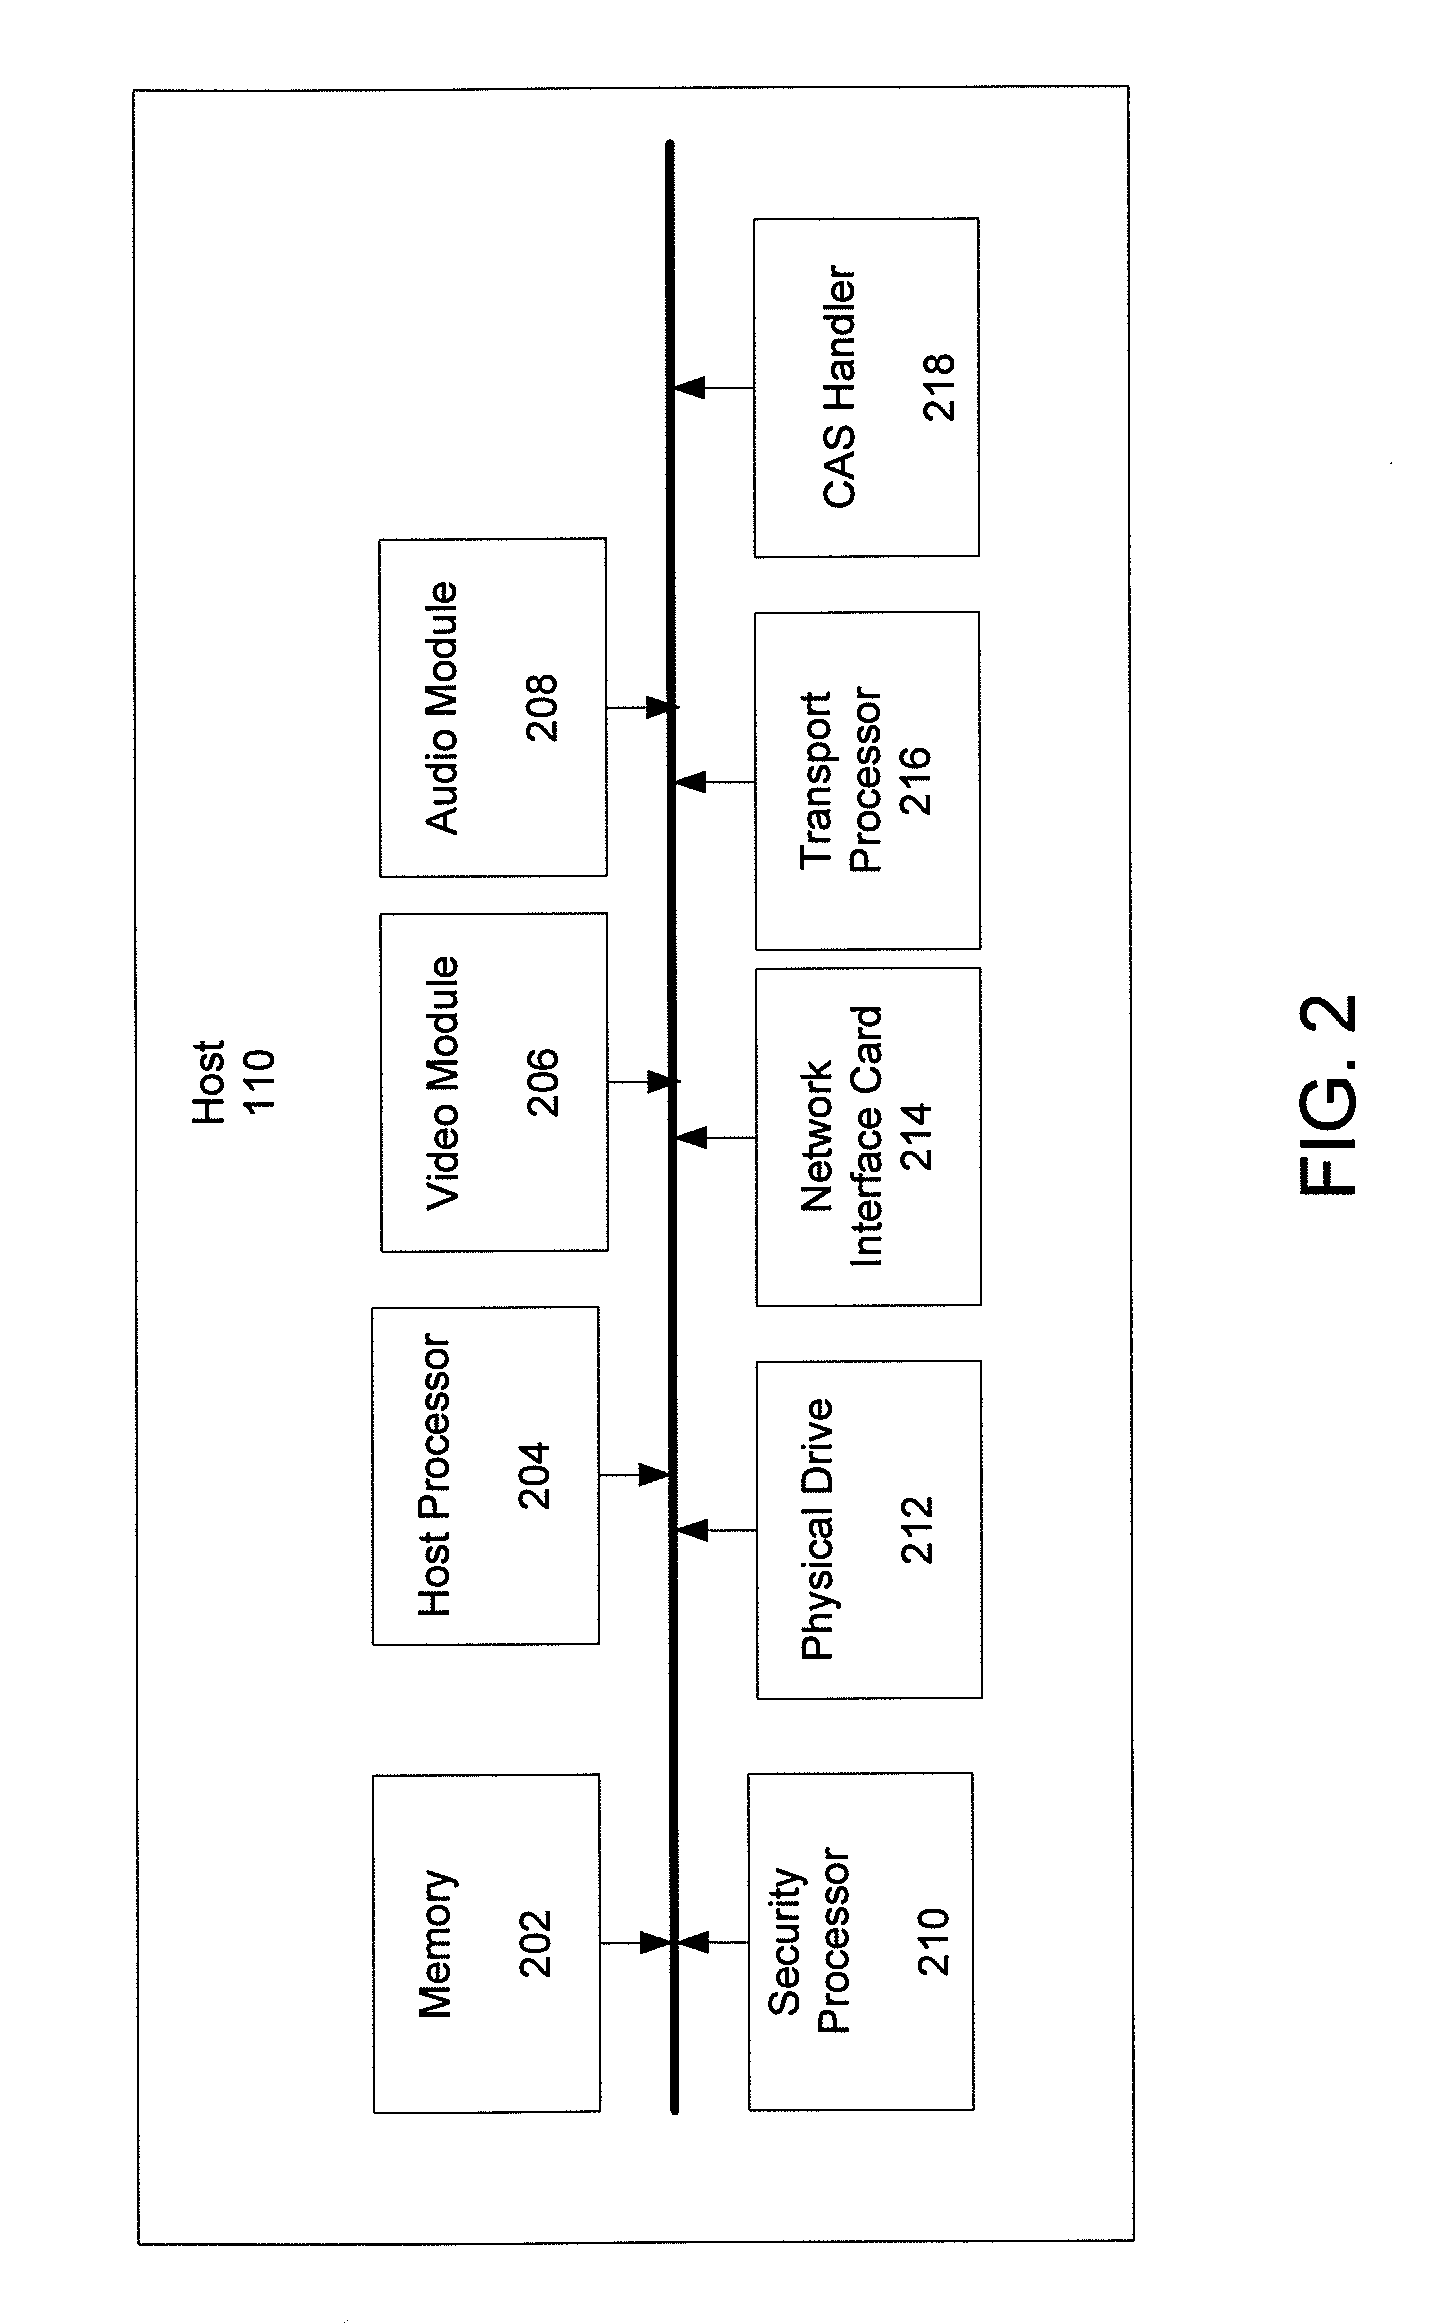 Authenticated communication between security devices